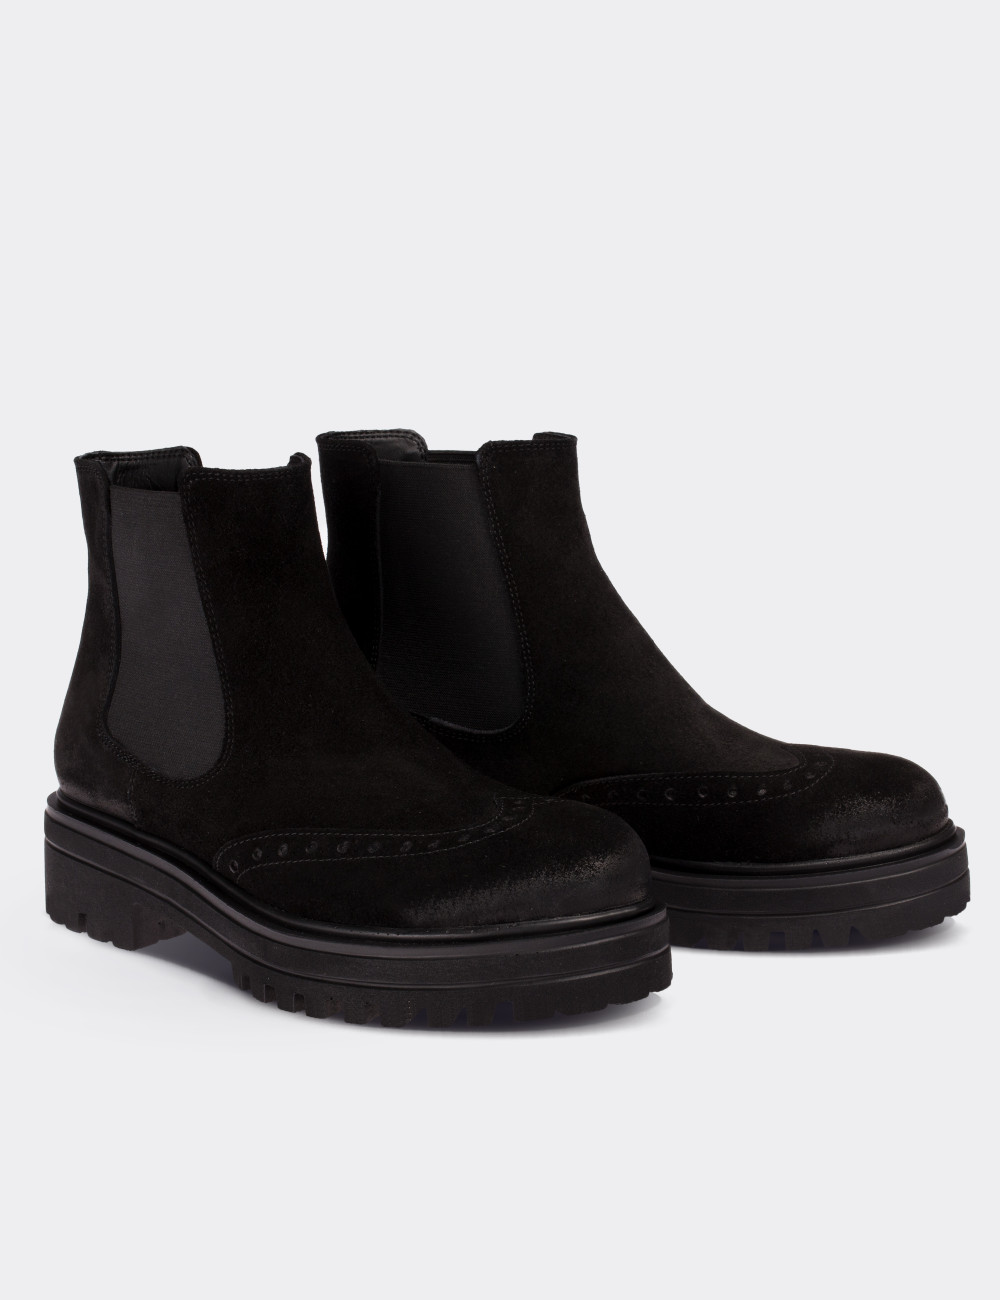 Black Suede Leather Chelsea Boots - 01800ZSYHE03